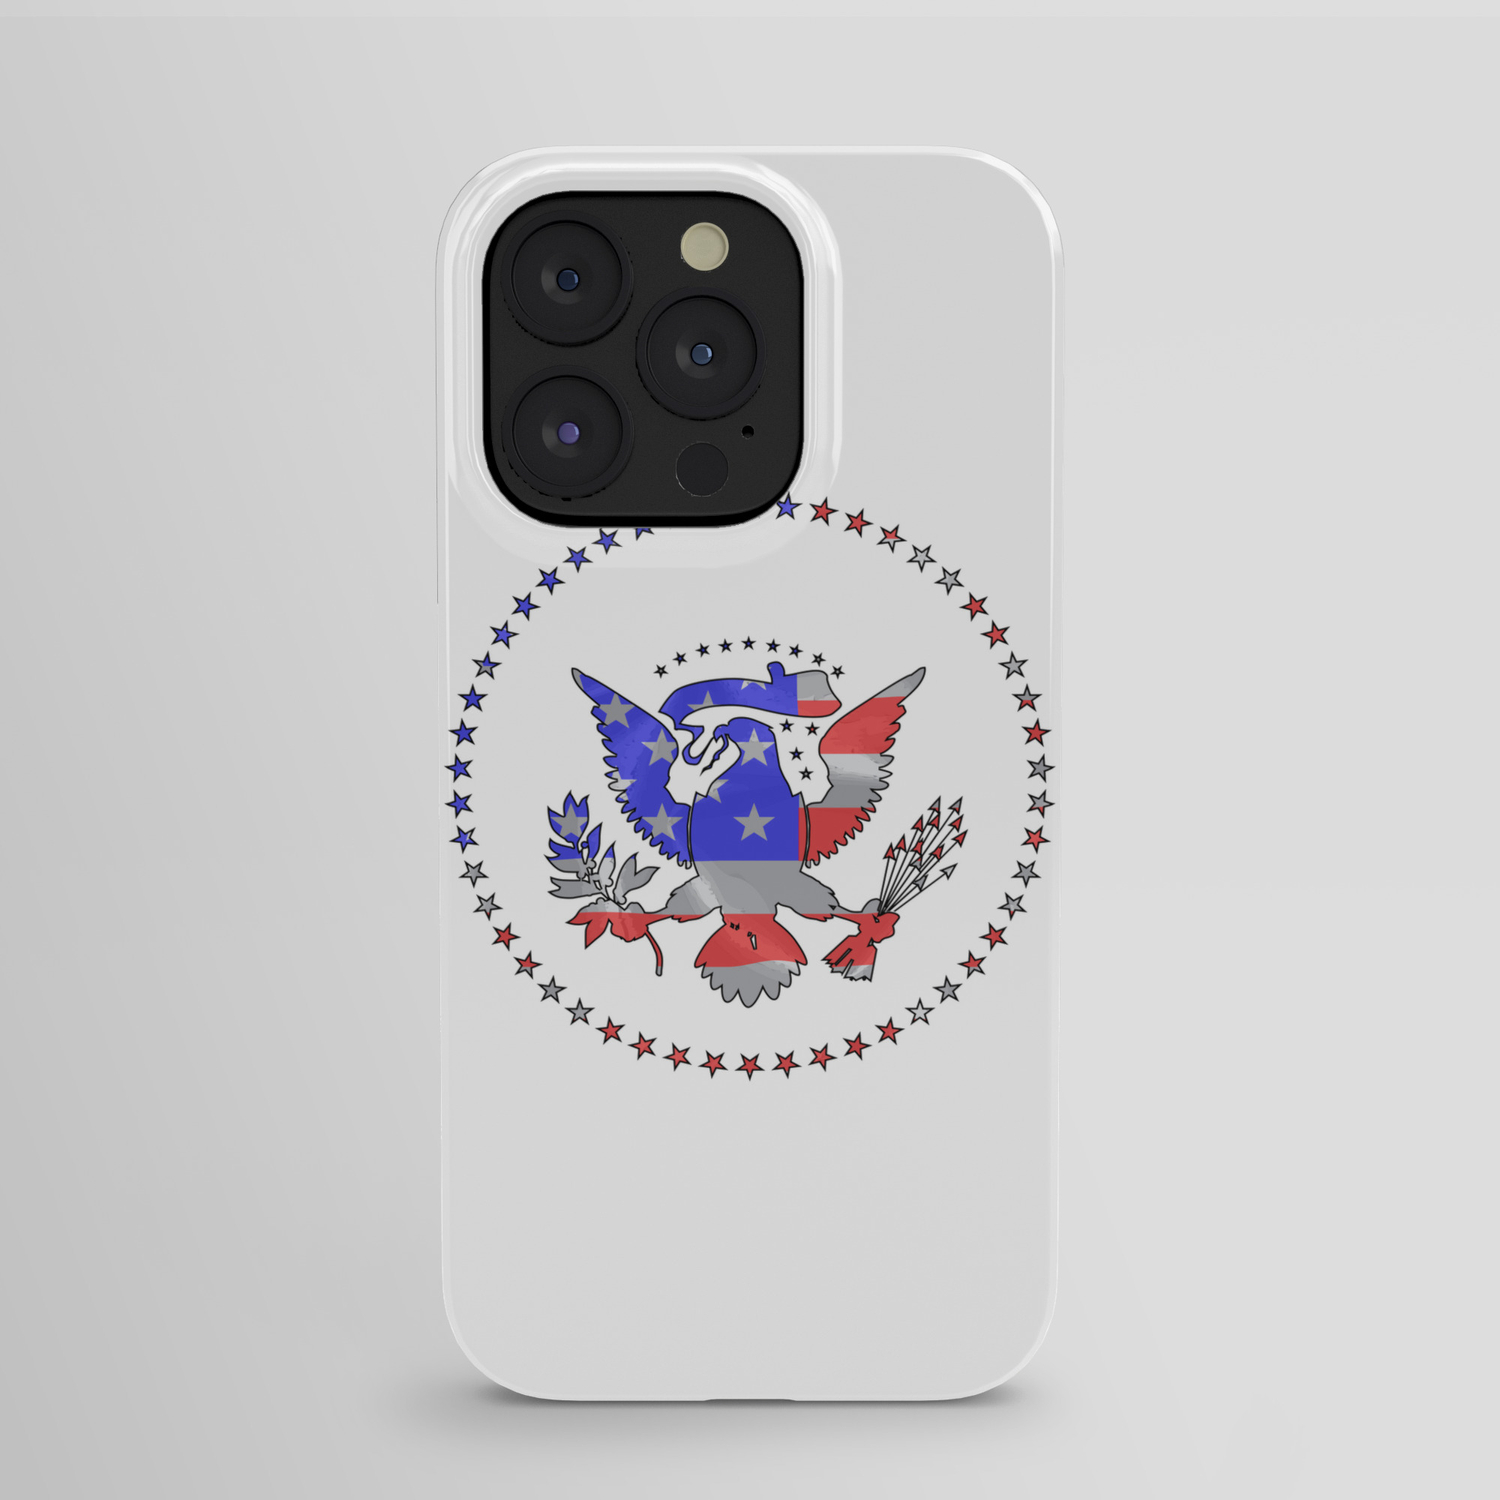 overspringen bloed compleet Stars And Stripes Inset Into American Eagle Icon iPhone Case by HomeStead  Digital | Society6